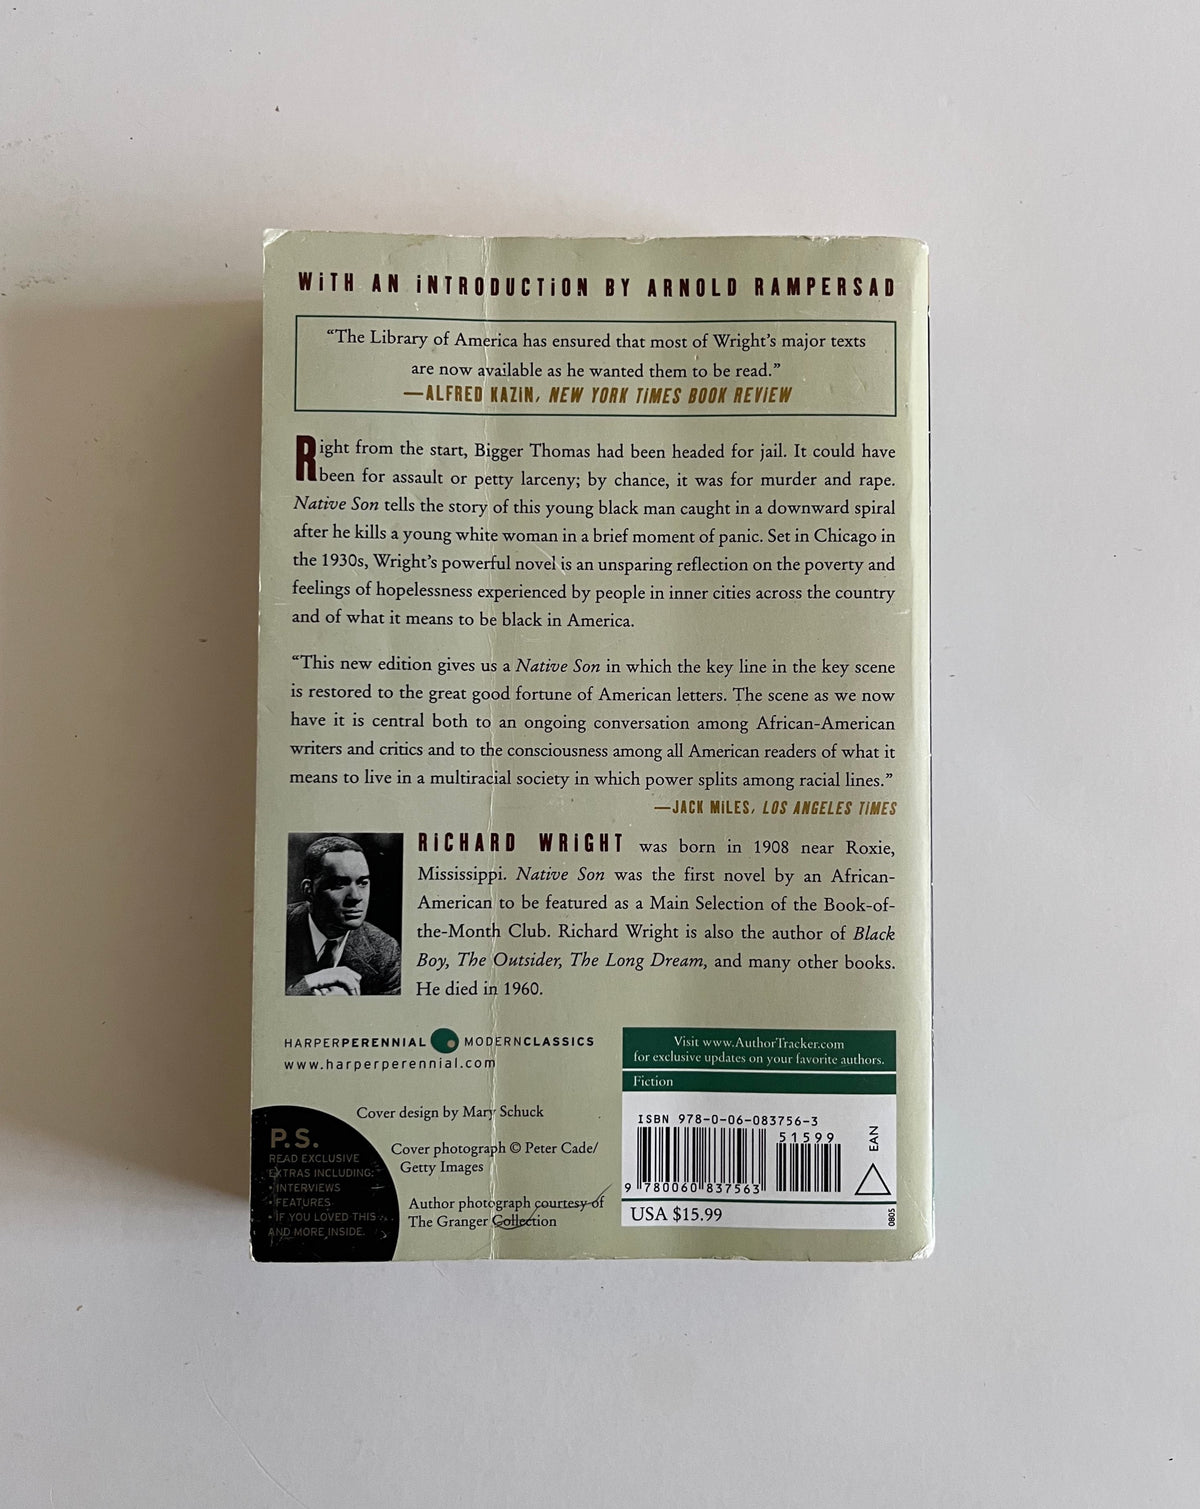 DONATE: Native Son by Richard Wright